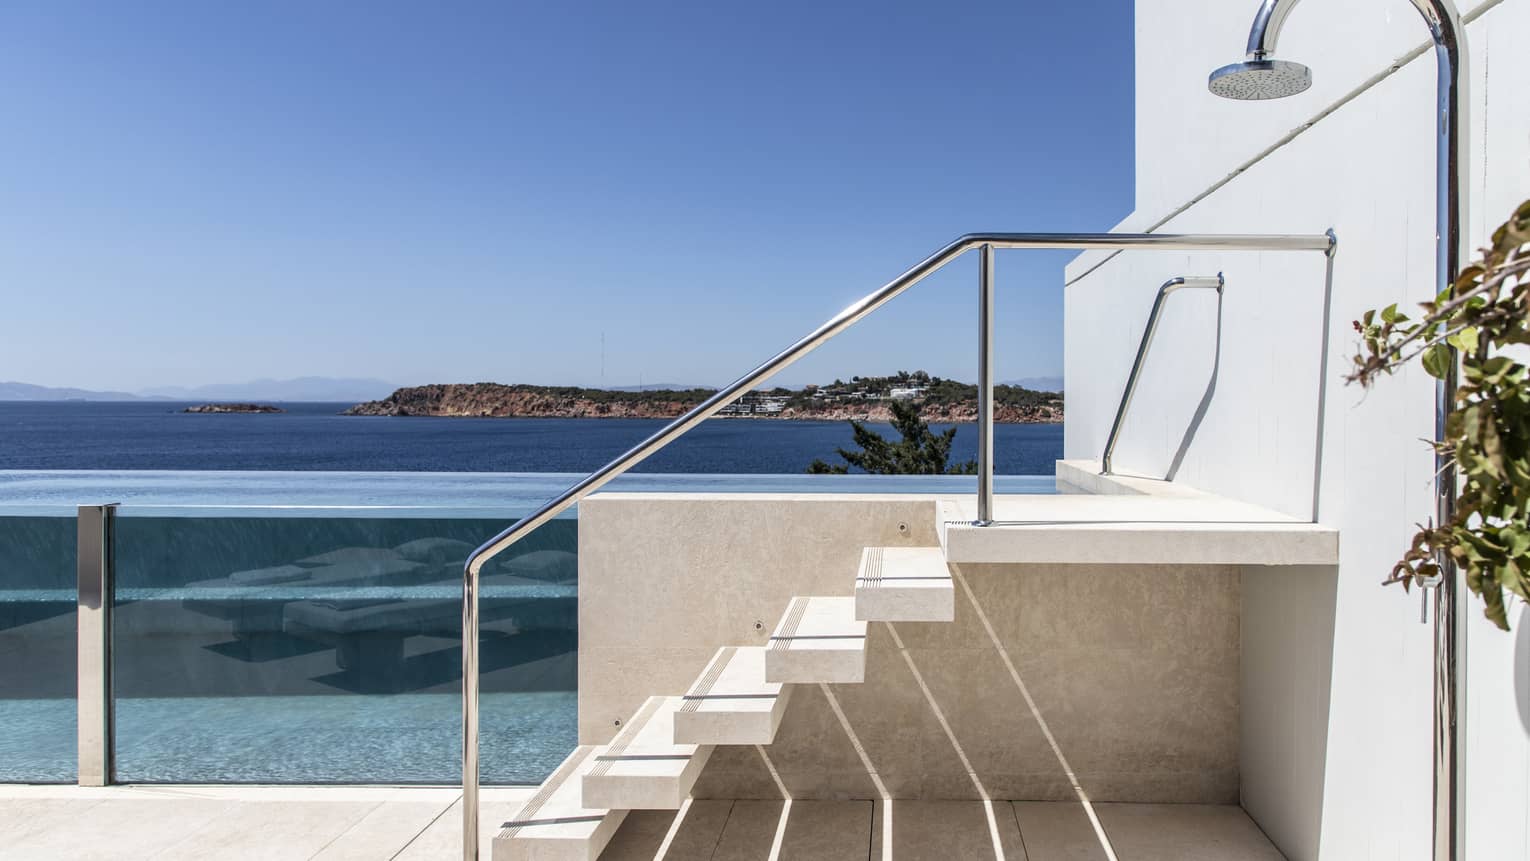 Six stairs lead to entrance of a raised, glass-enclosed pool on private patio with sea view